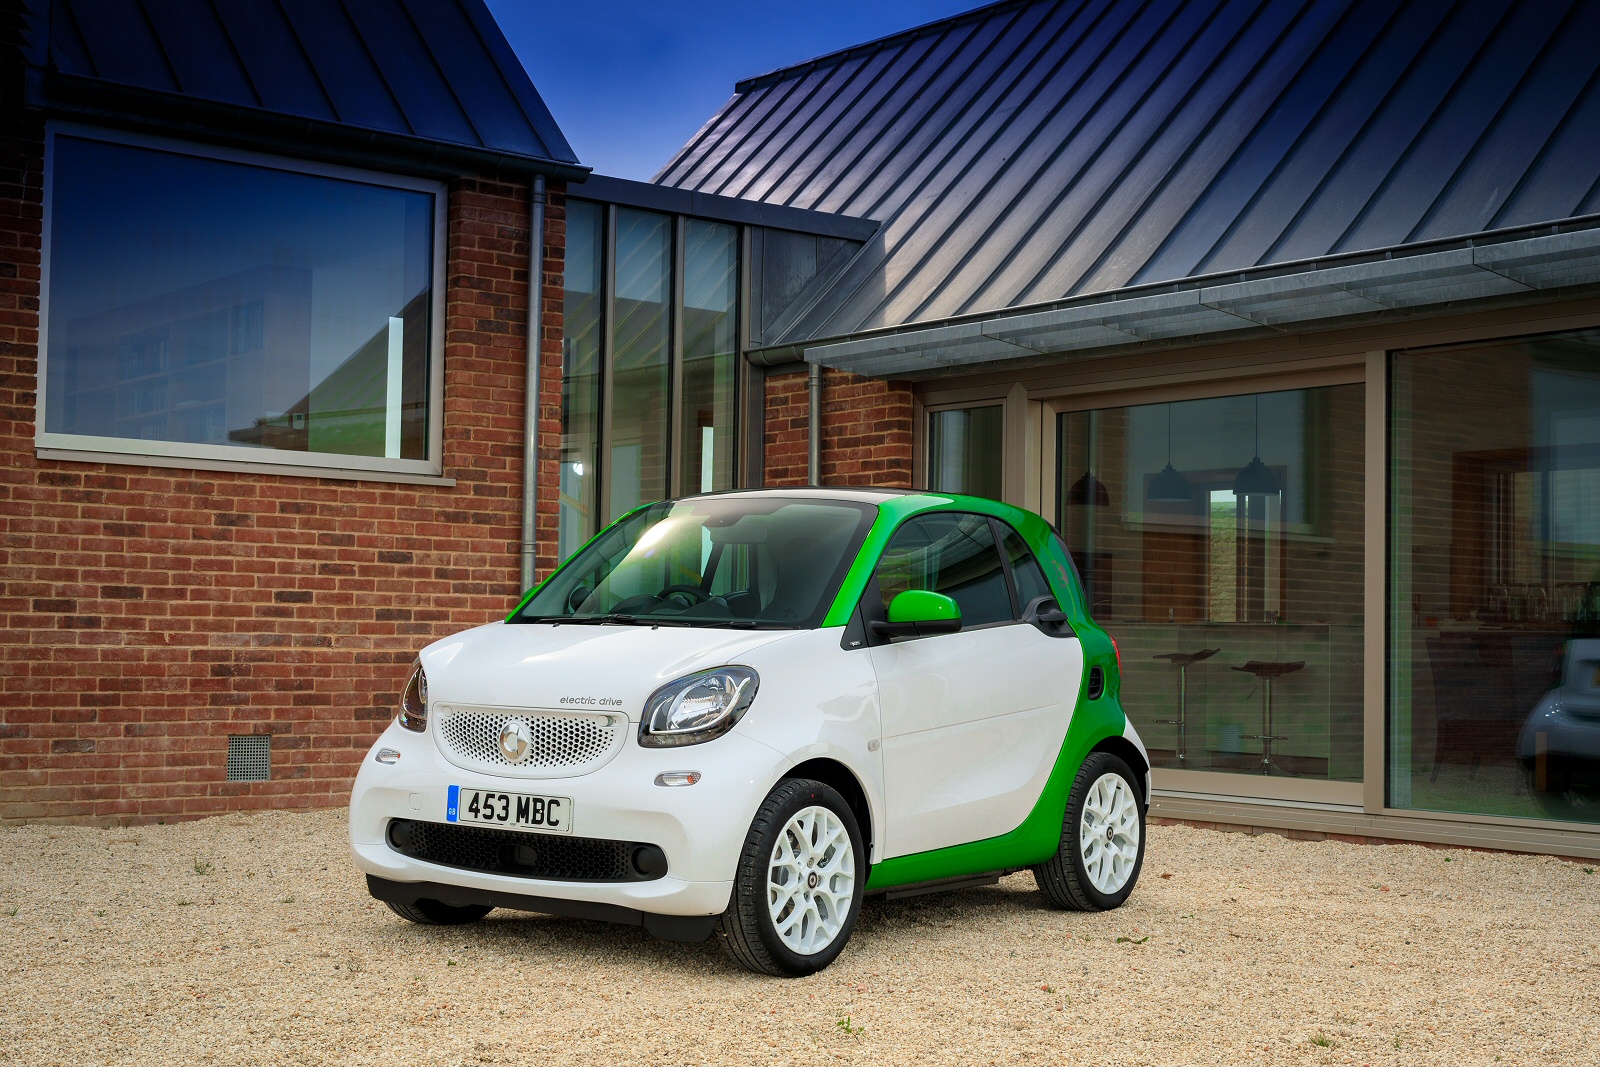 Smart ForTwo Electric Drive Vs BMW I3 Vs Renault Zoe: Review & Comparisons